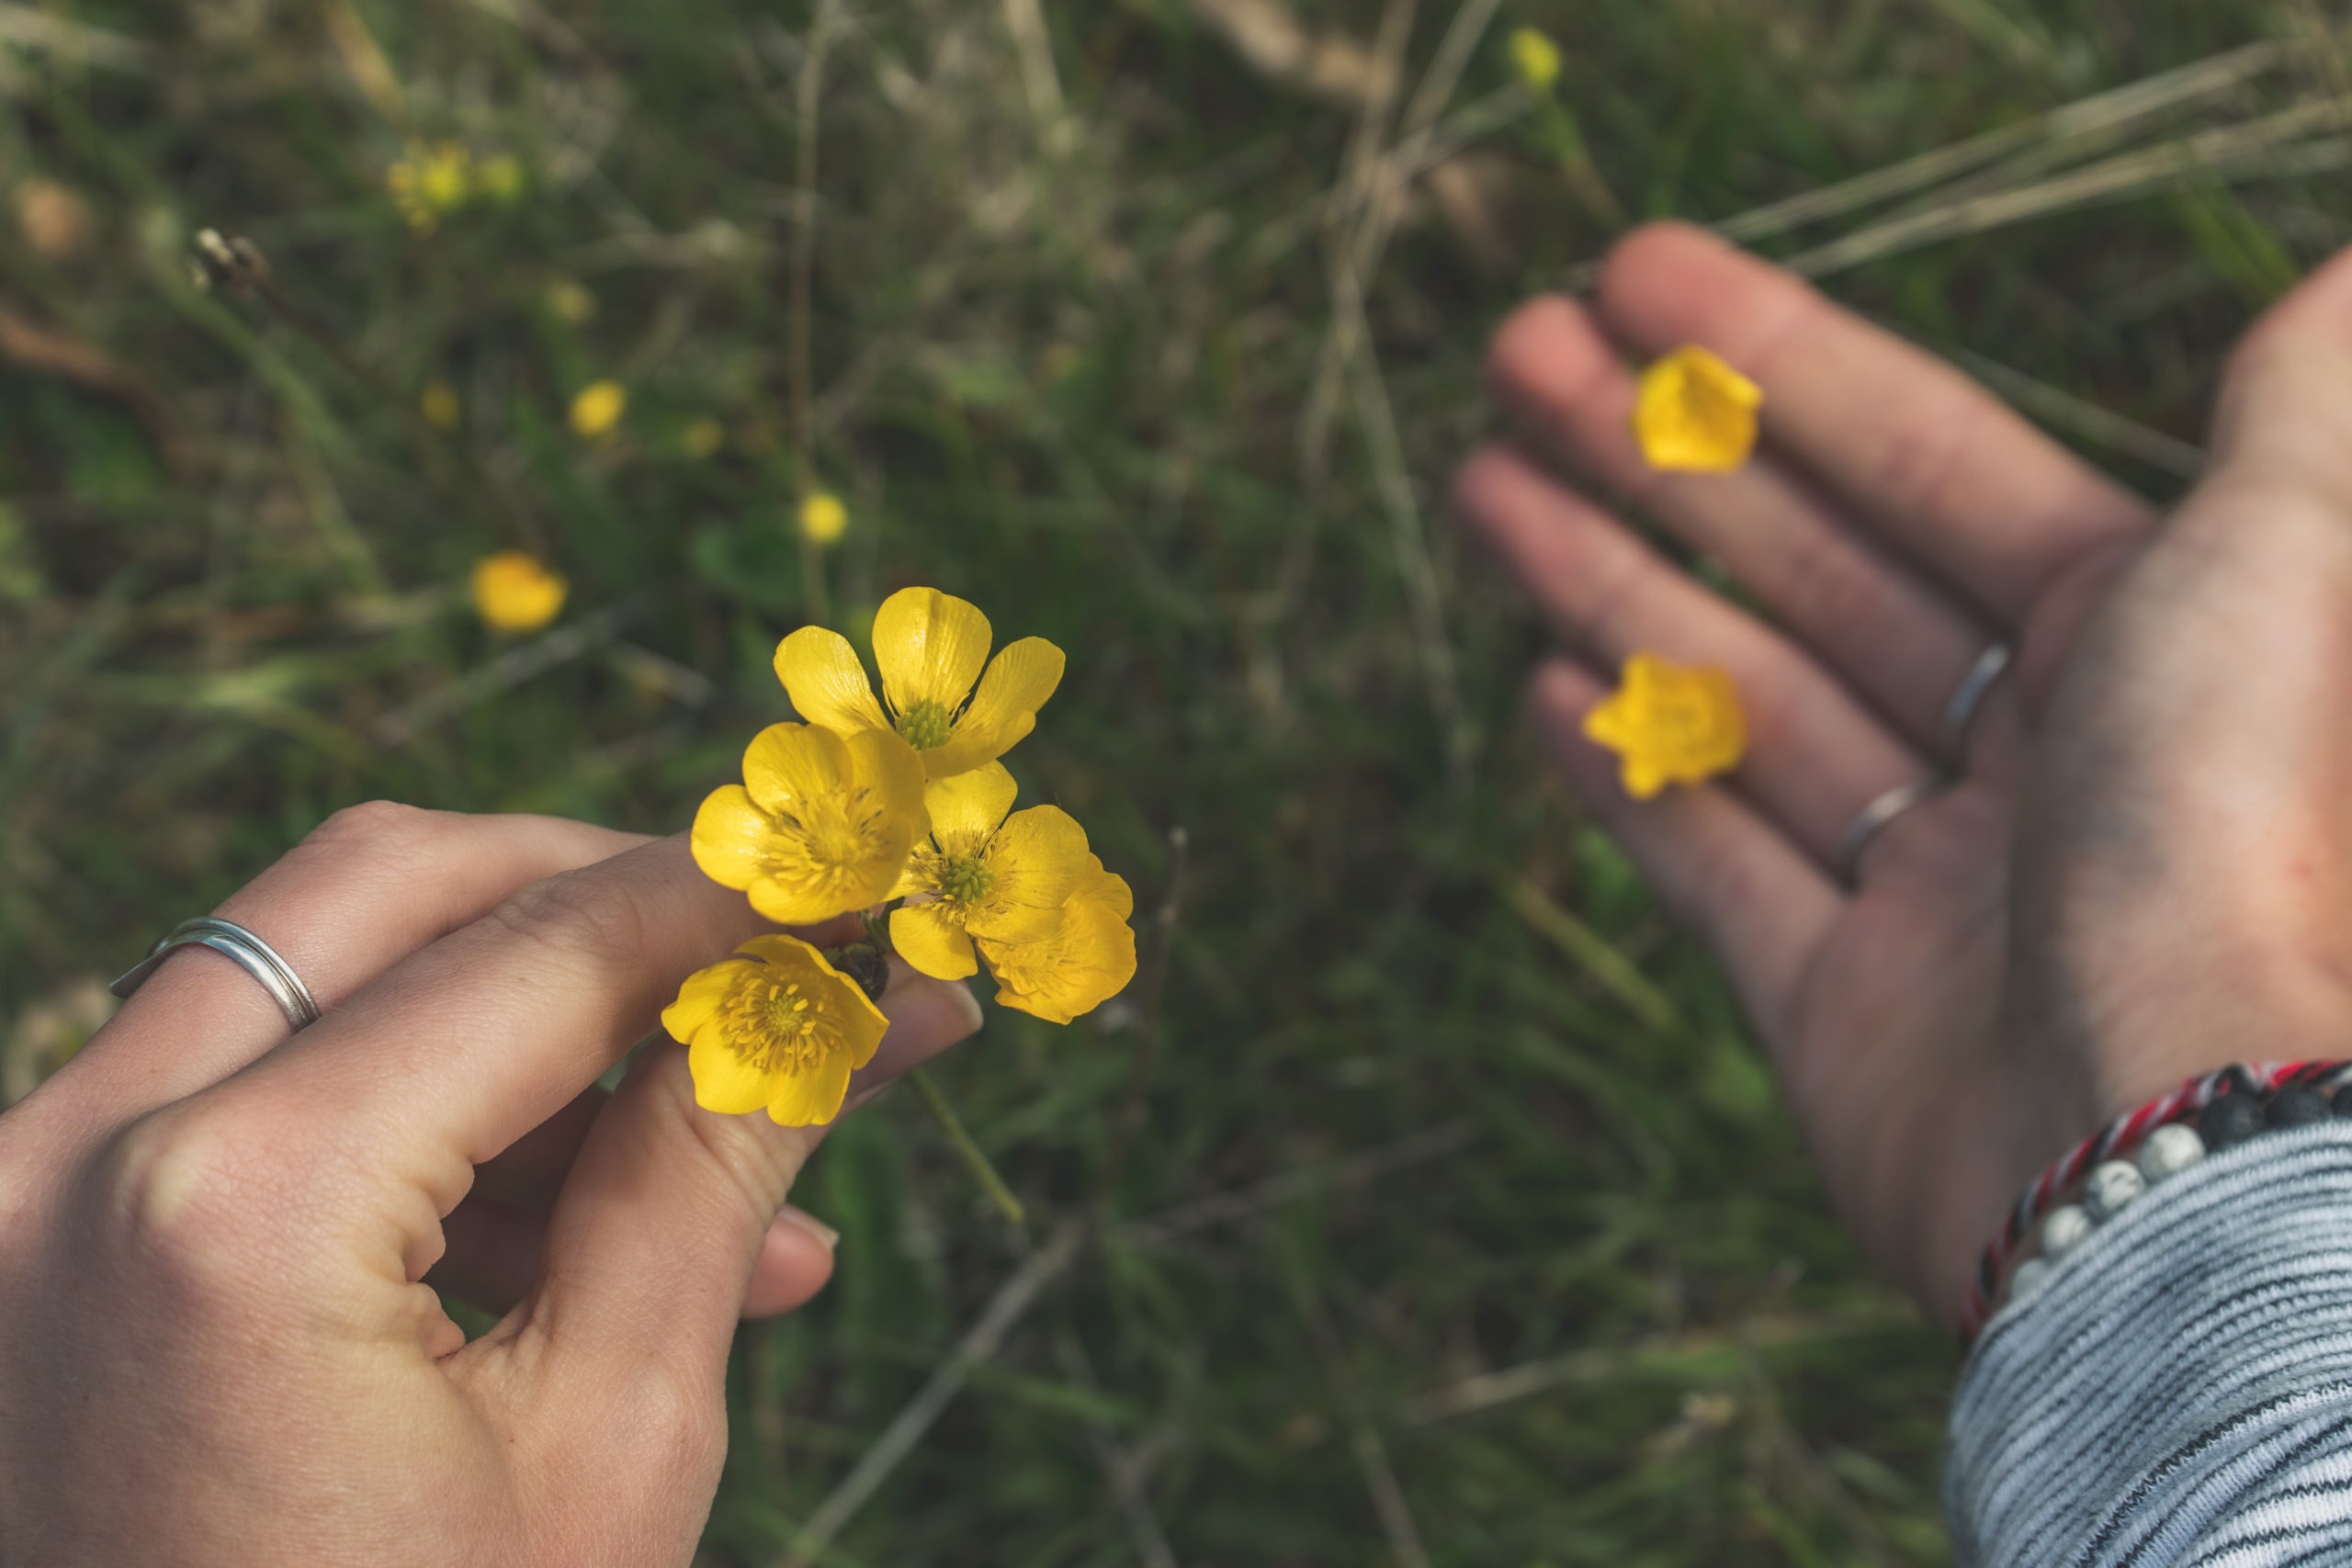 Girl holding a yellow buttercup flower plant in the forest.